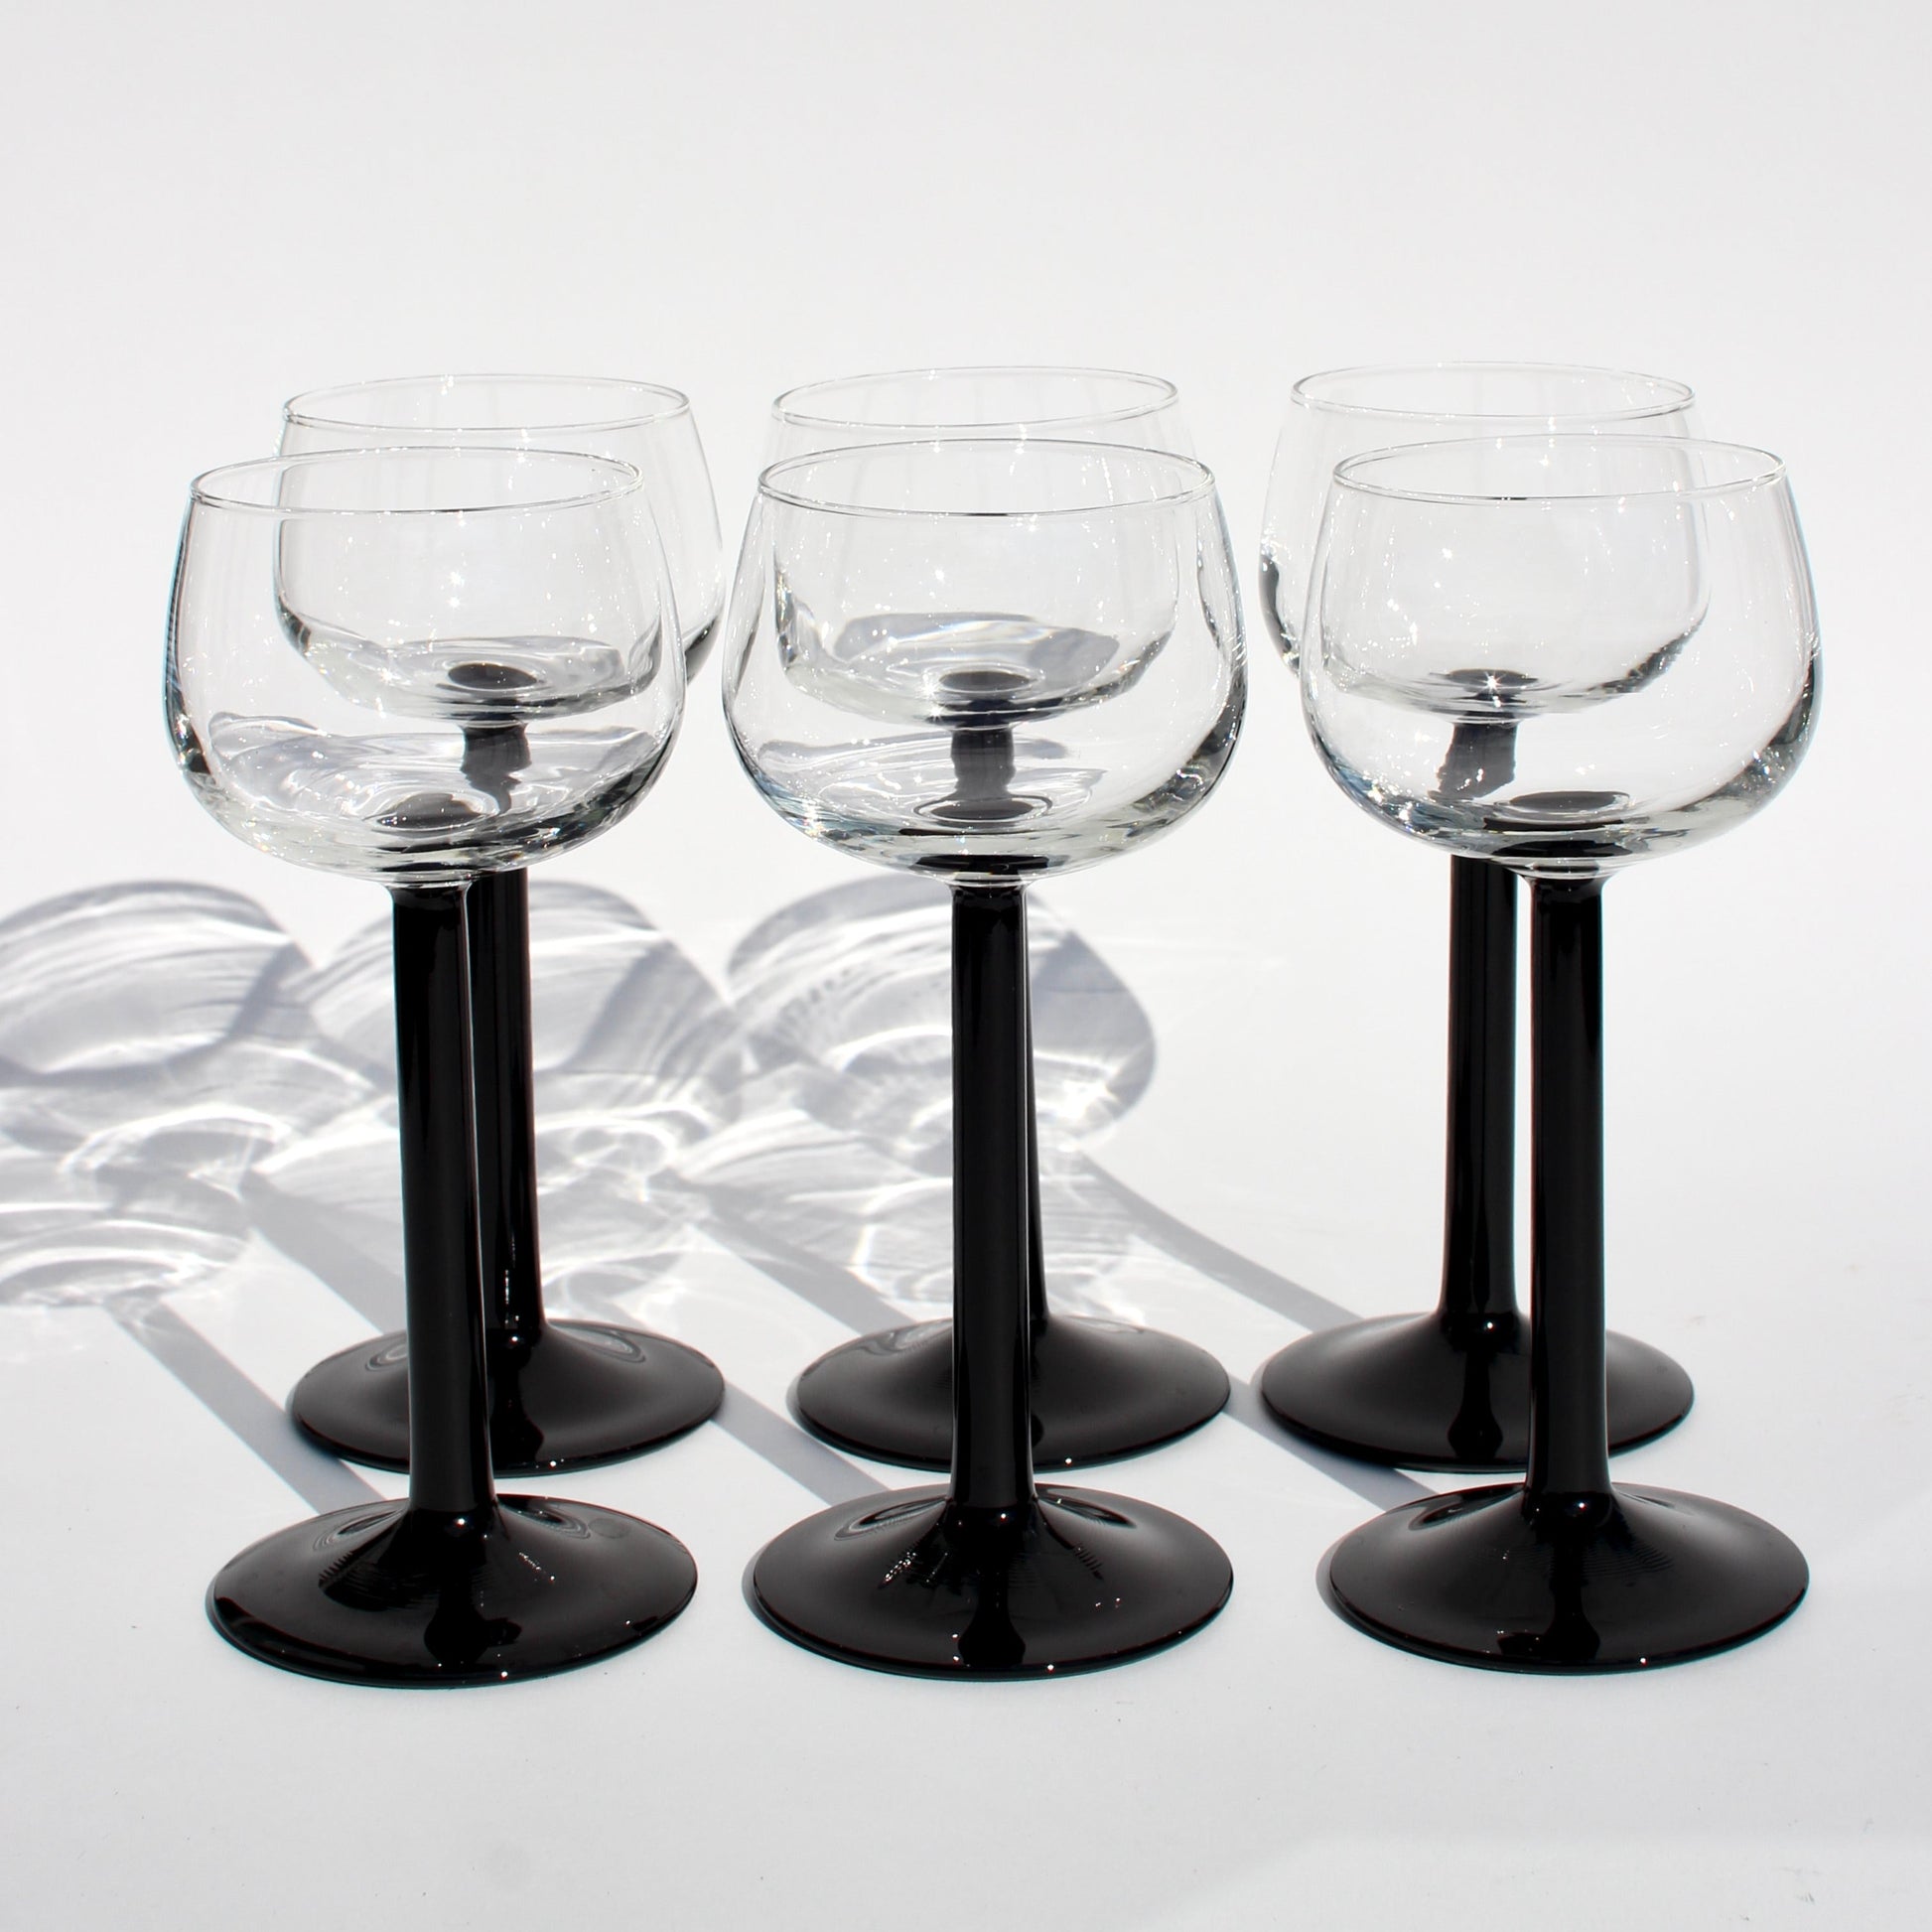 Classic Touch Black Stemmed Water Glasses, Set of 6